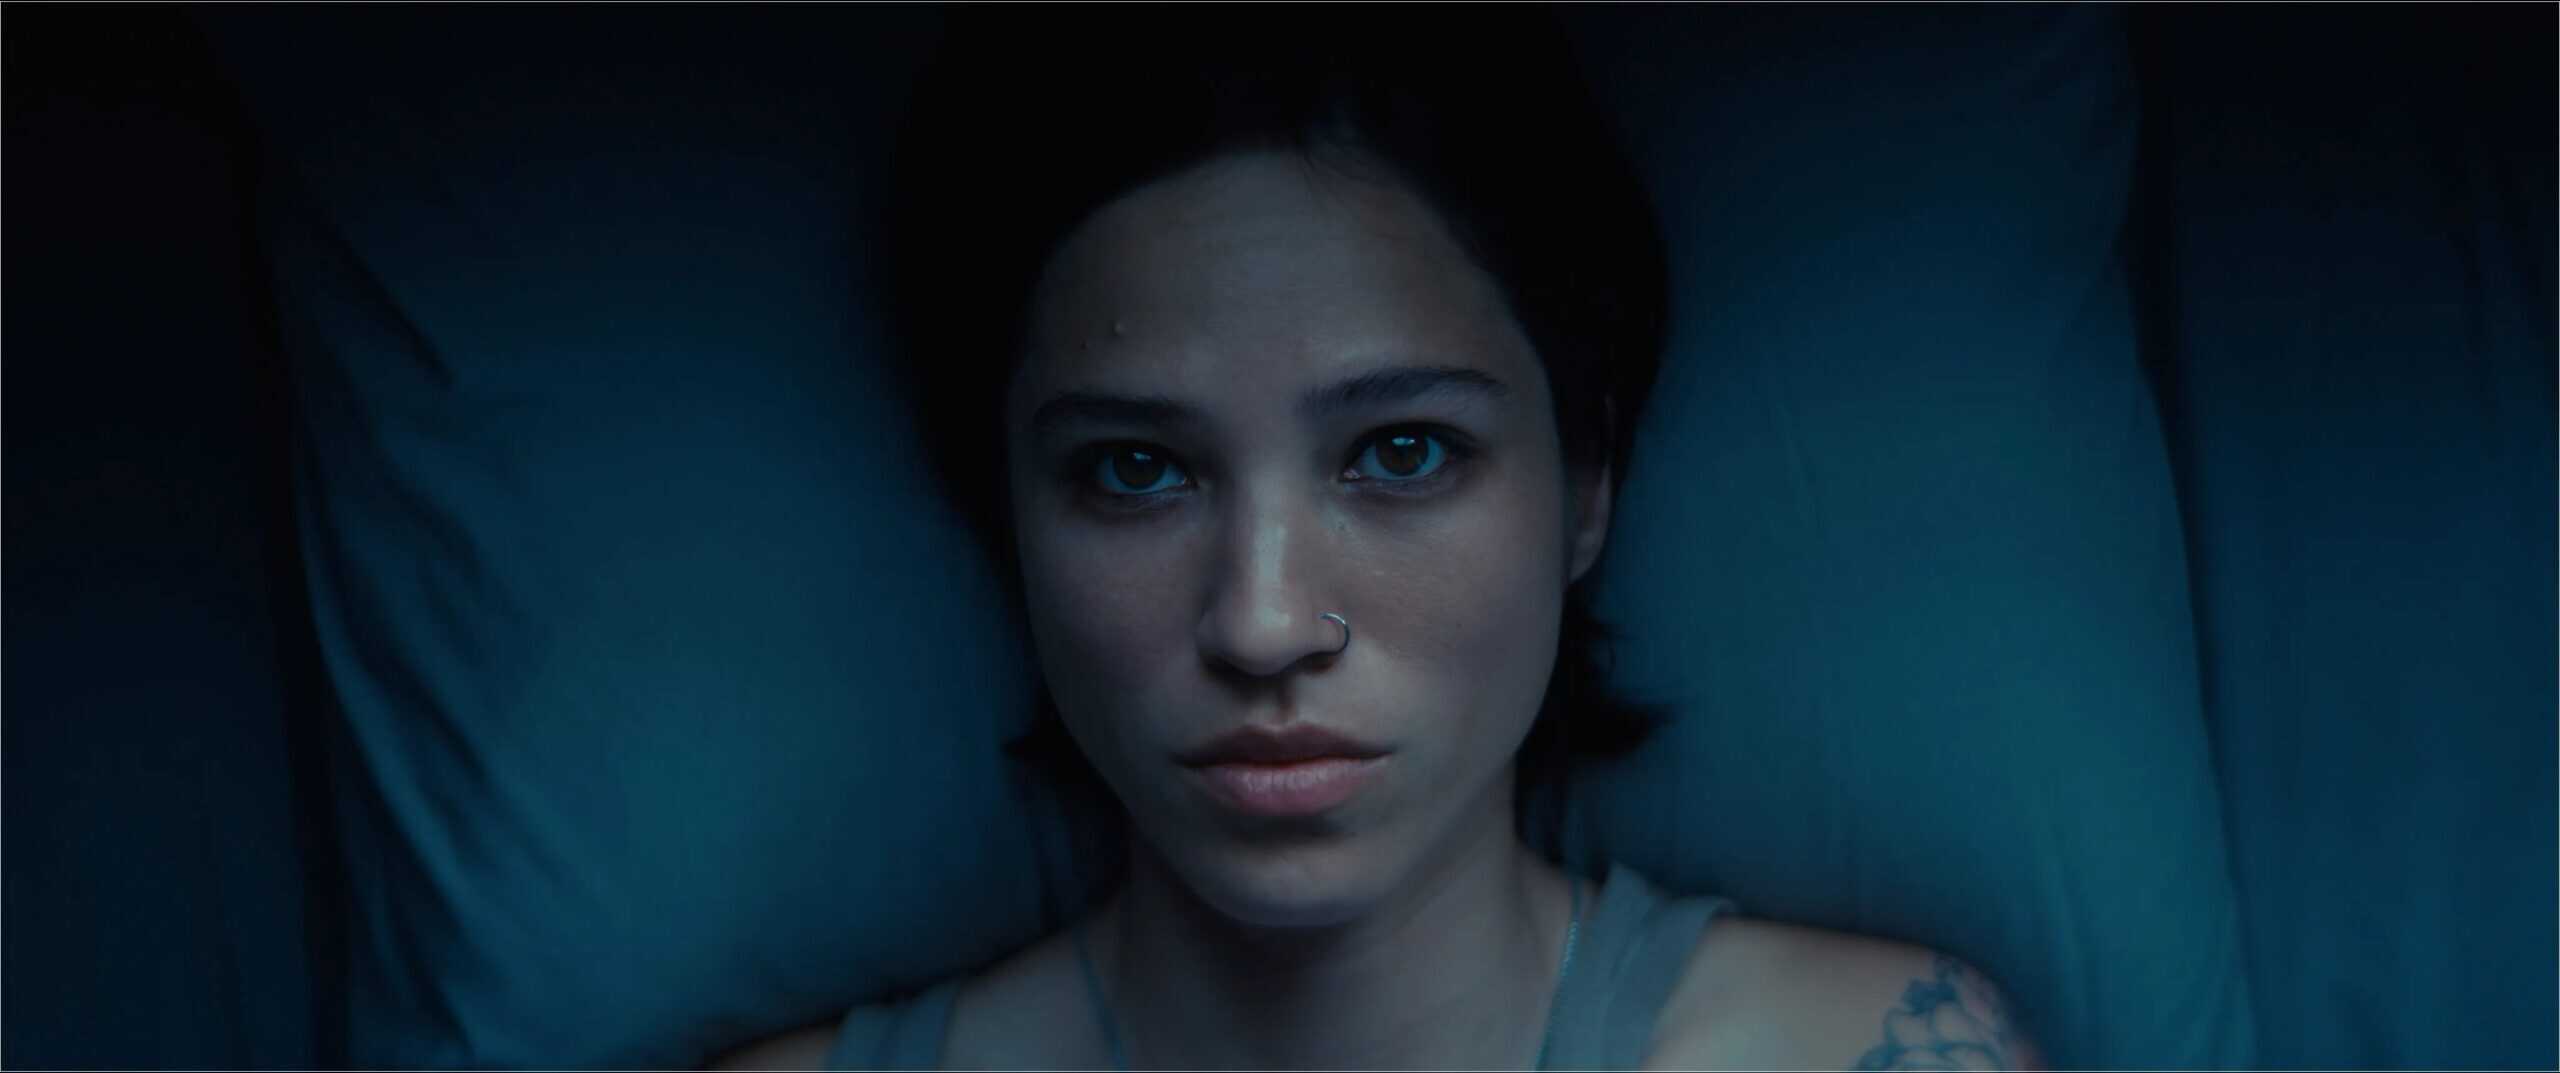 Don’t Move: Sam Raimi-produced horror film starring Kelsey Asbille acquired by Netflix